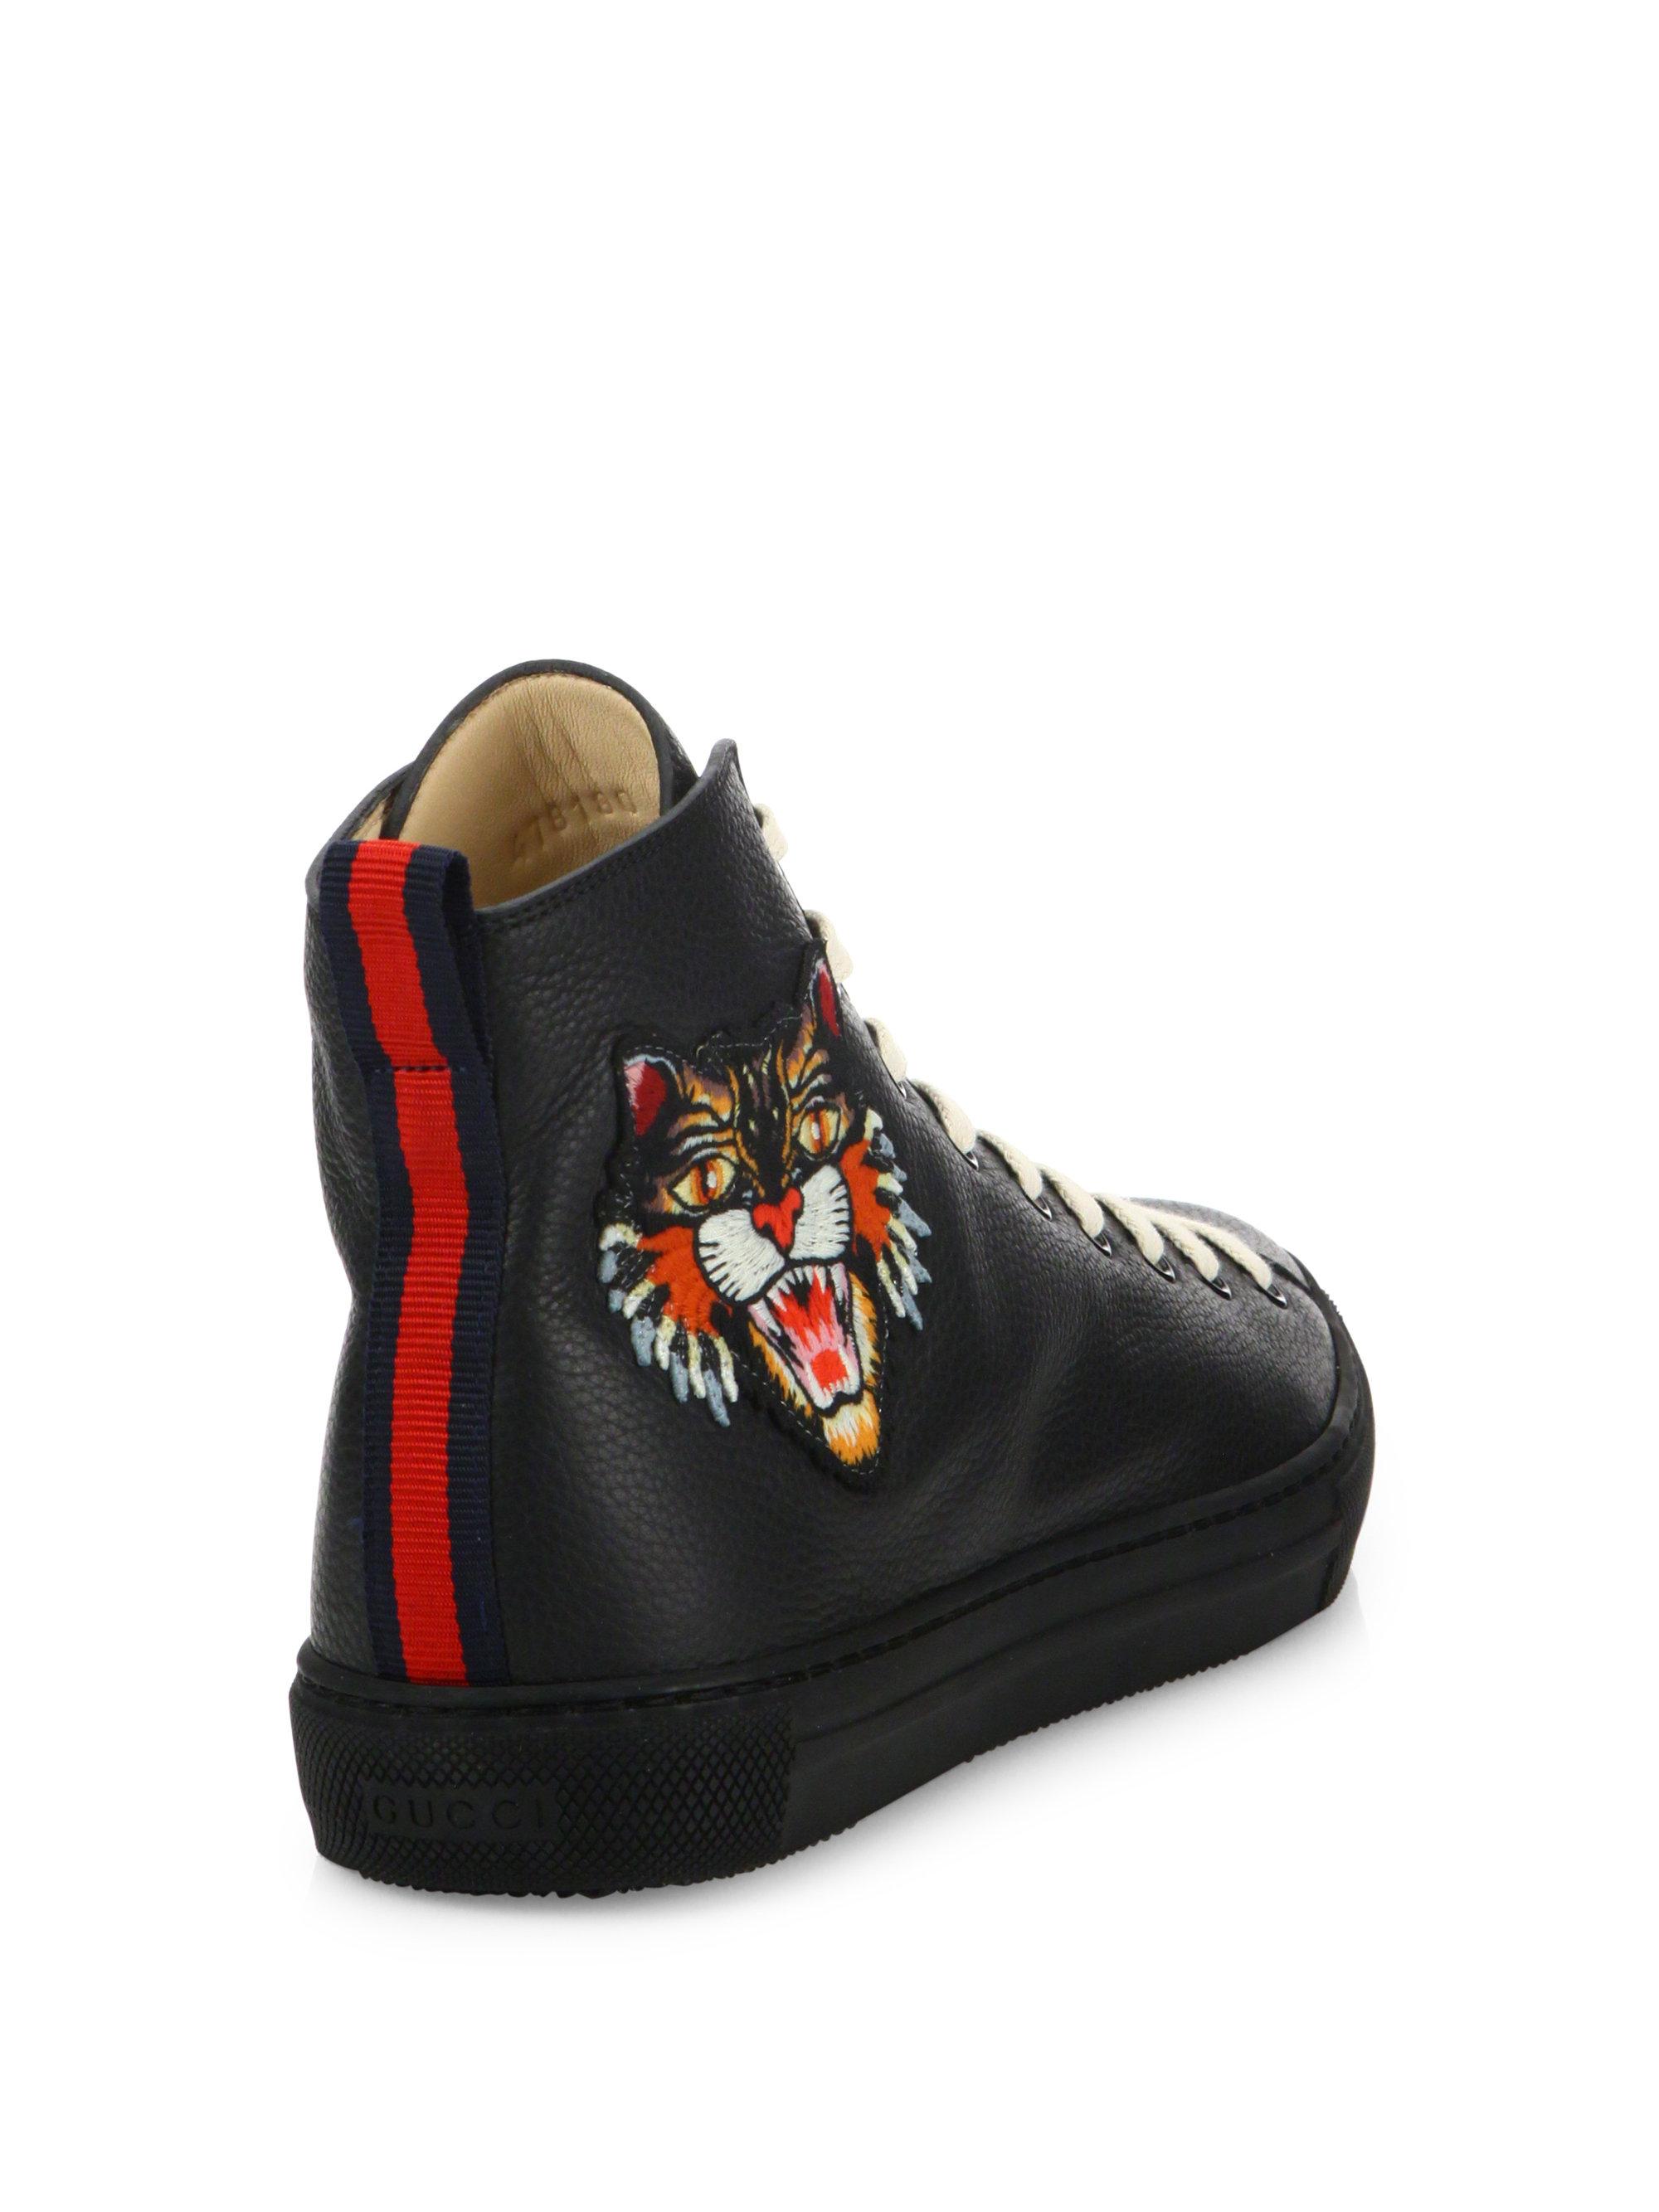 Gucci Major Tiger Ufo Embroidered Leather High-top Sneakers in Black - Lyst